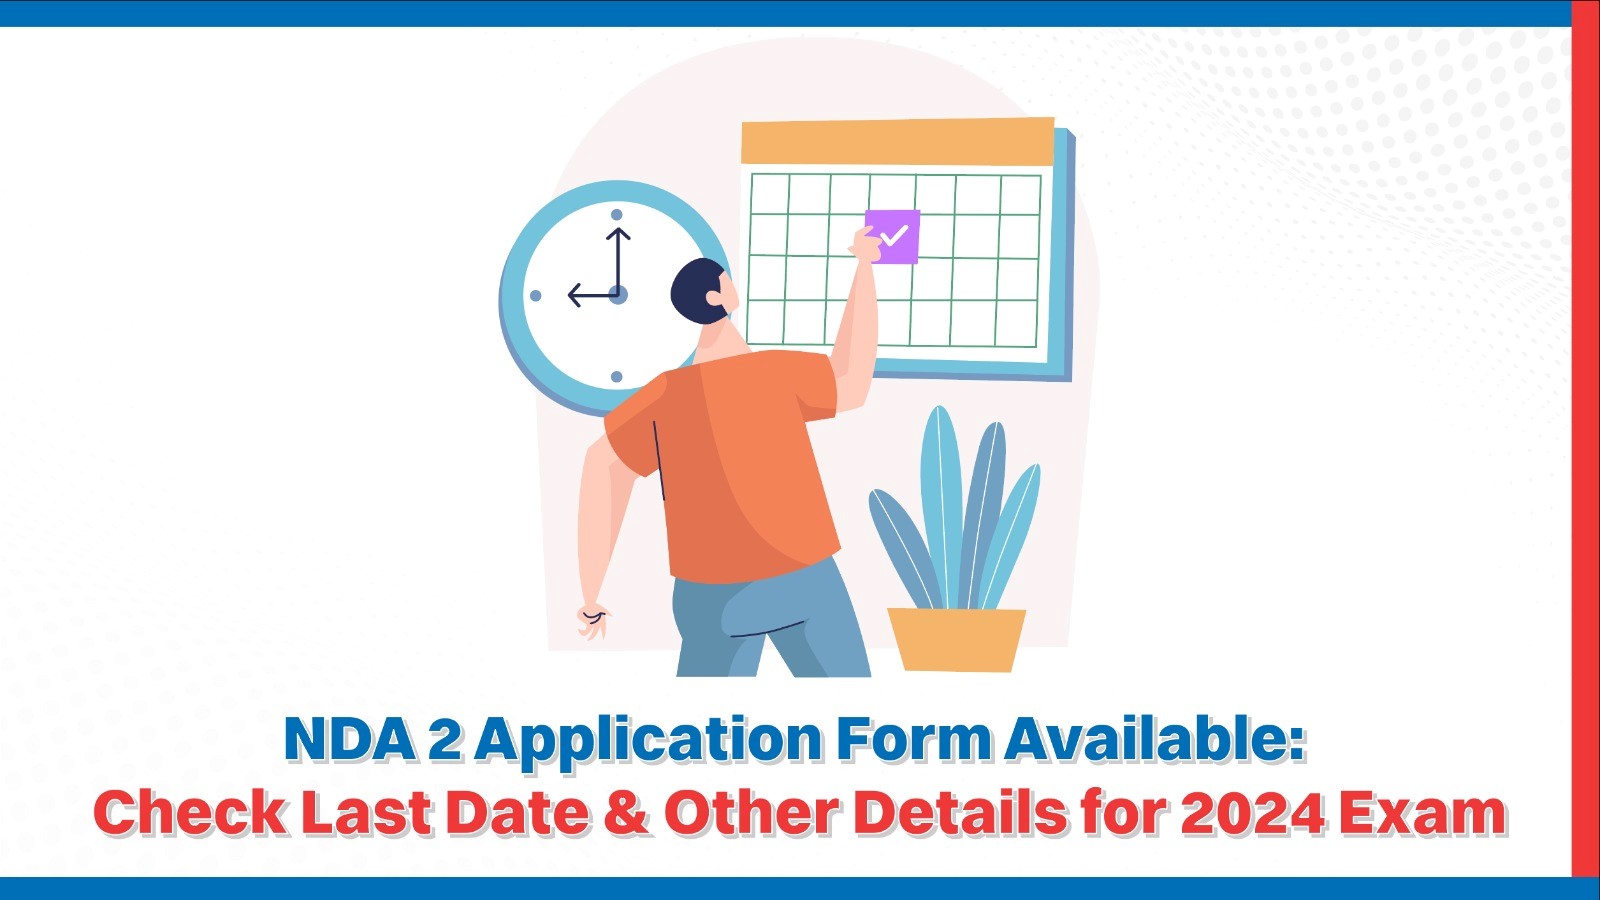 NDA 2 Application Form Available Check Last Date  Other Details for 2024 Exam.jpg